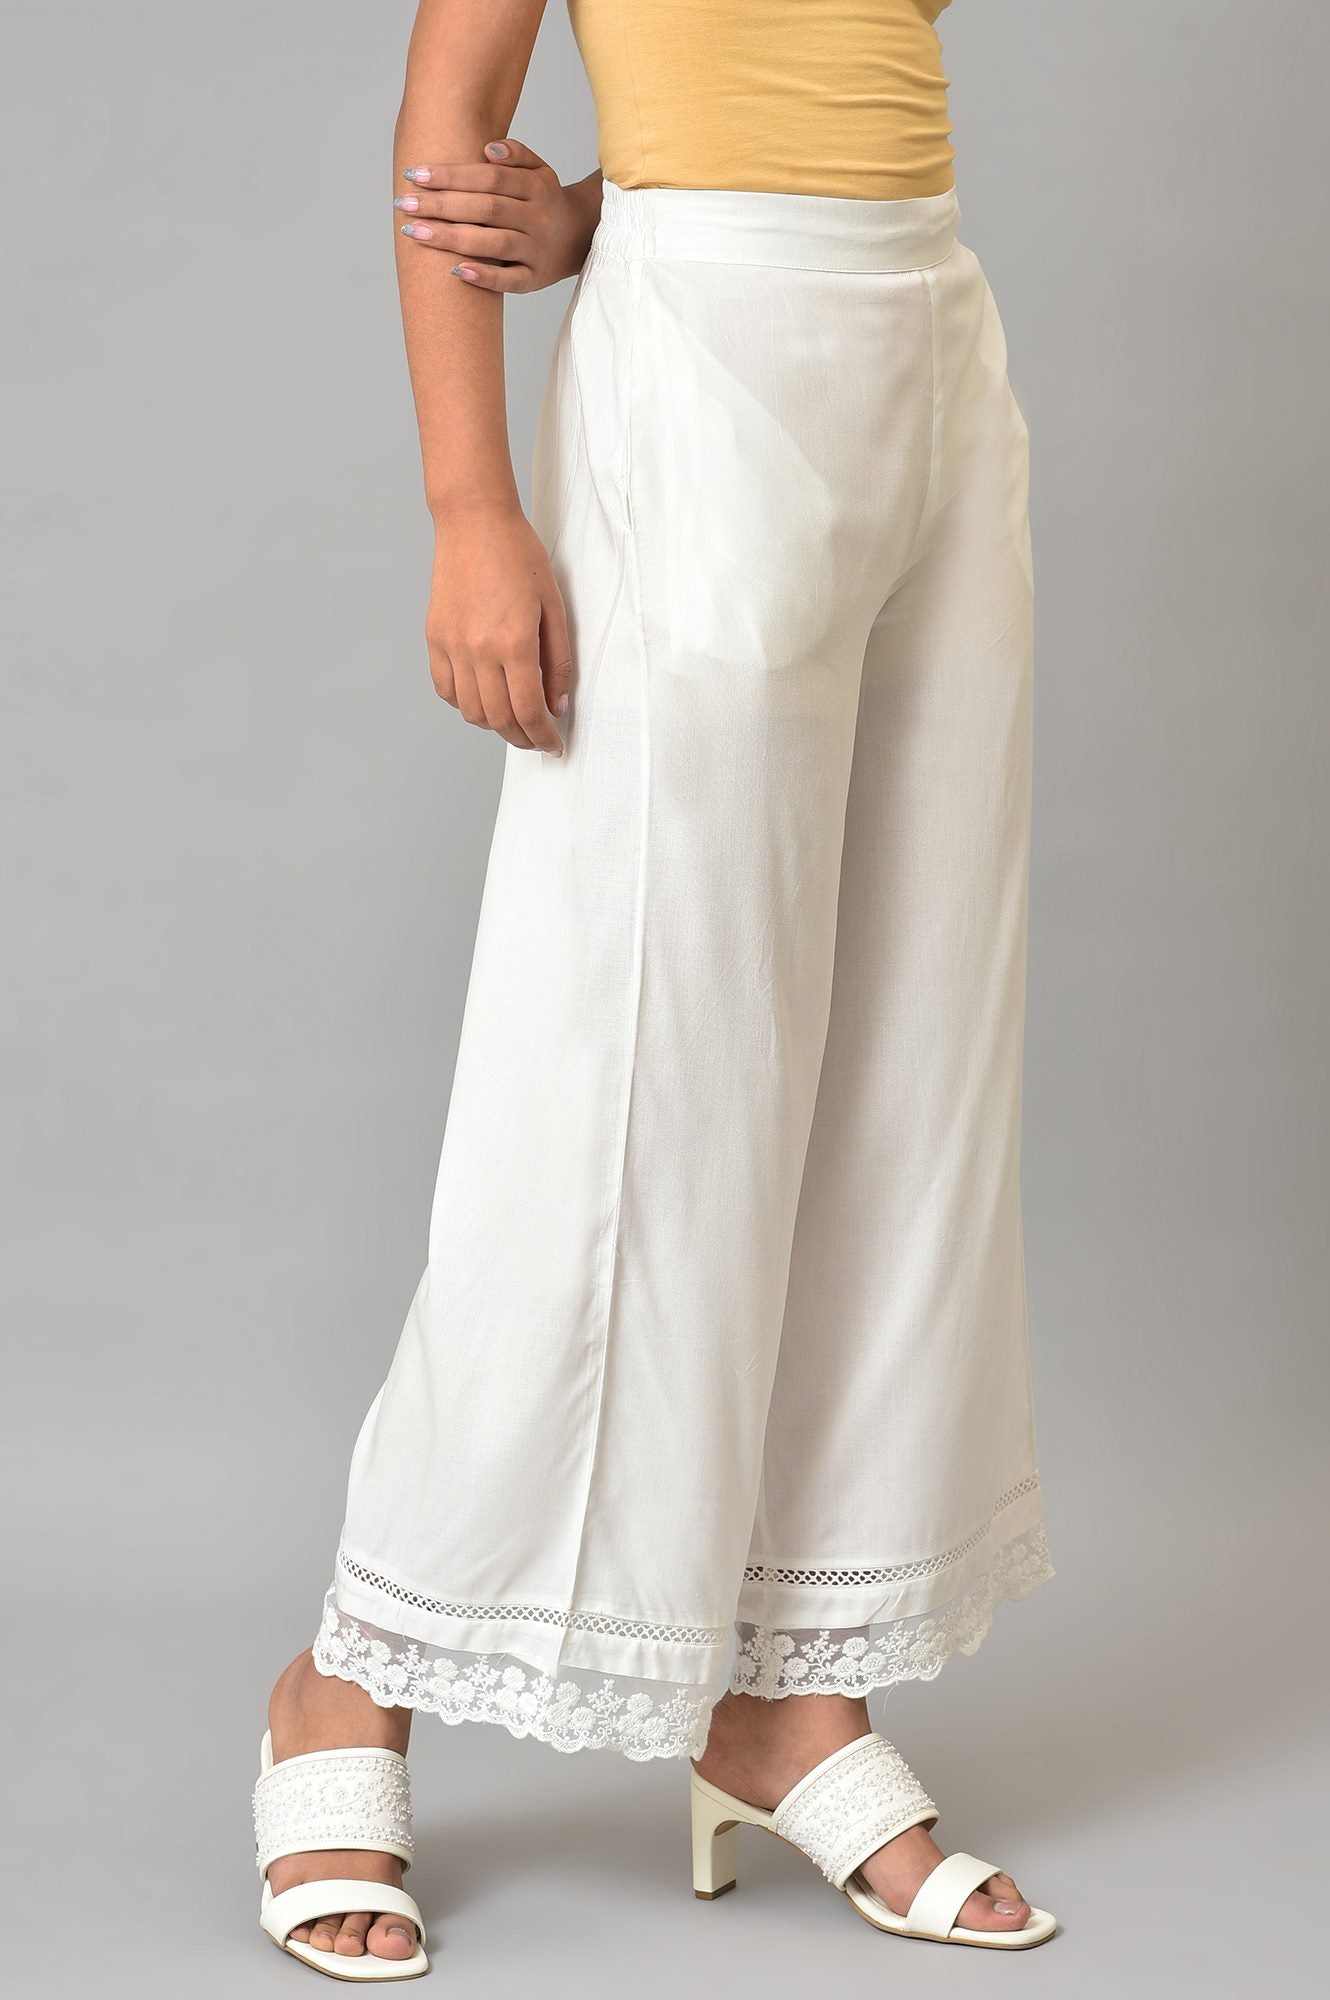 Ecru Parallel Pants With Lace At Hemline